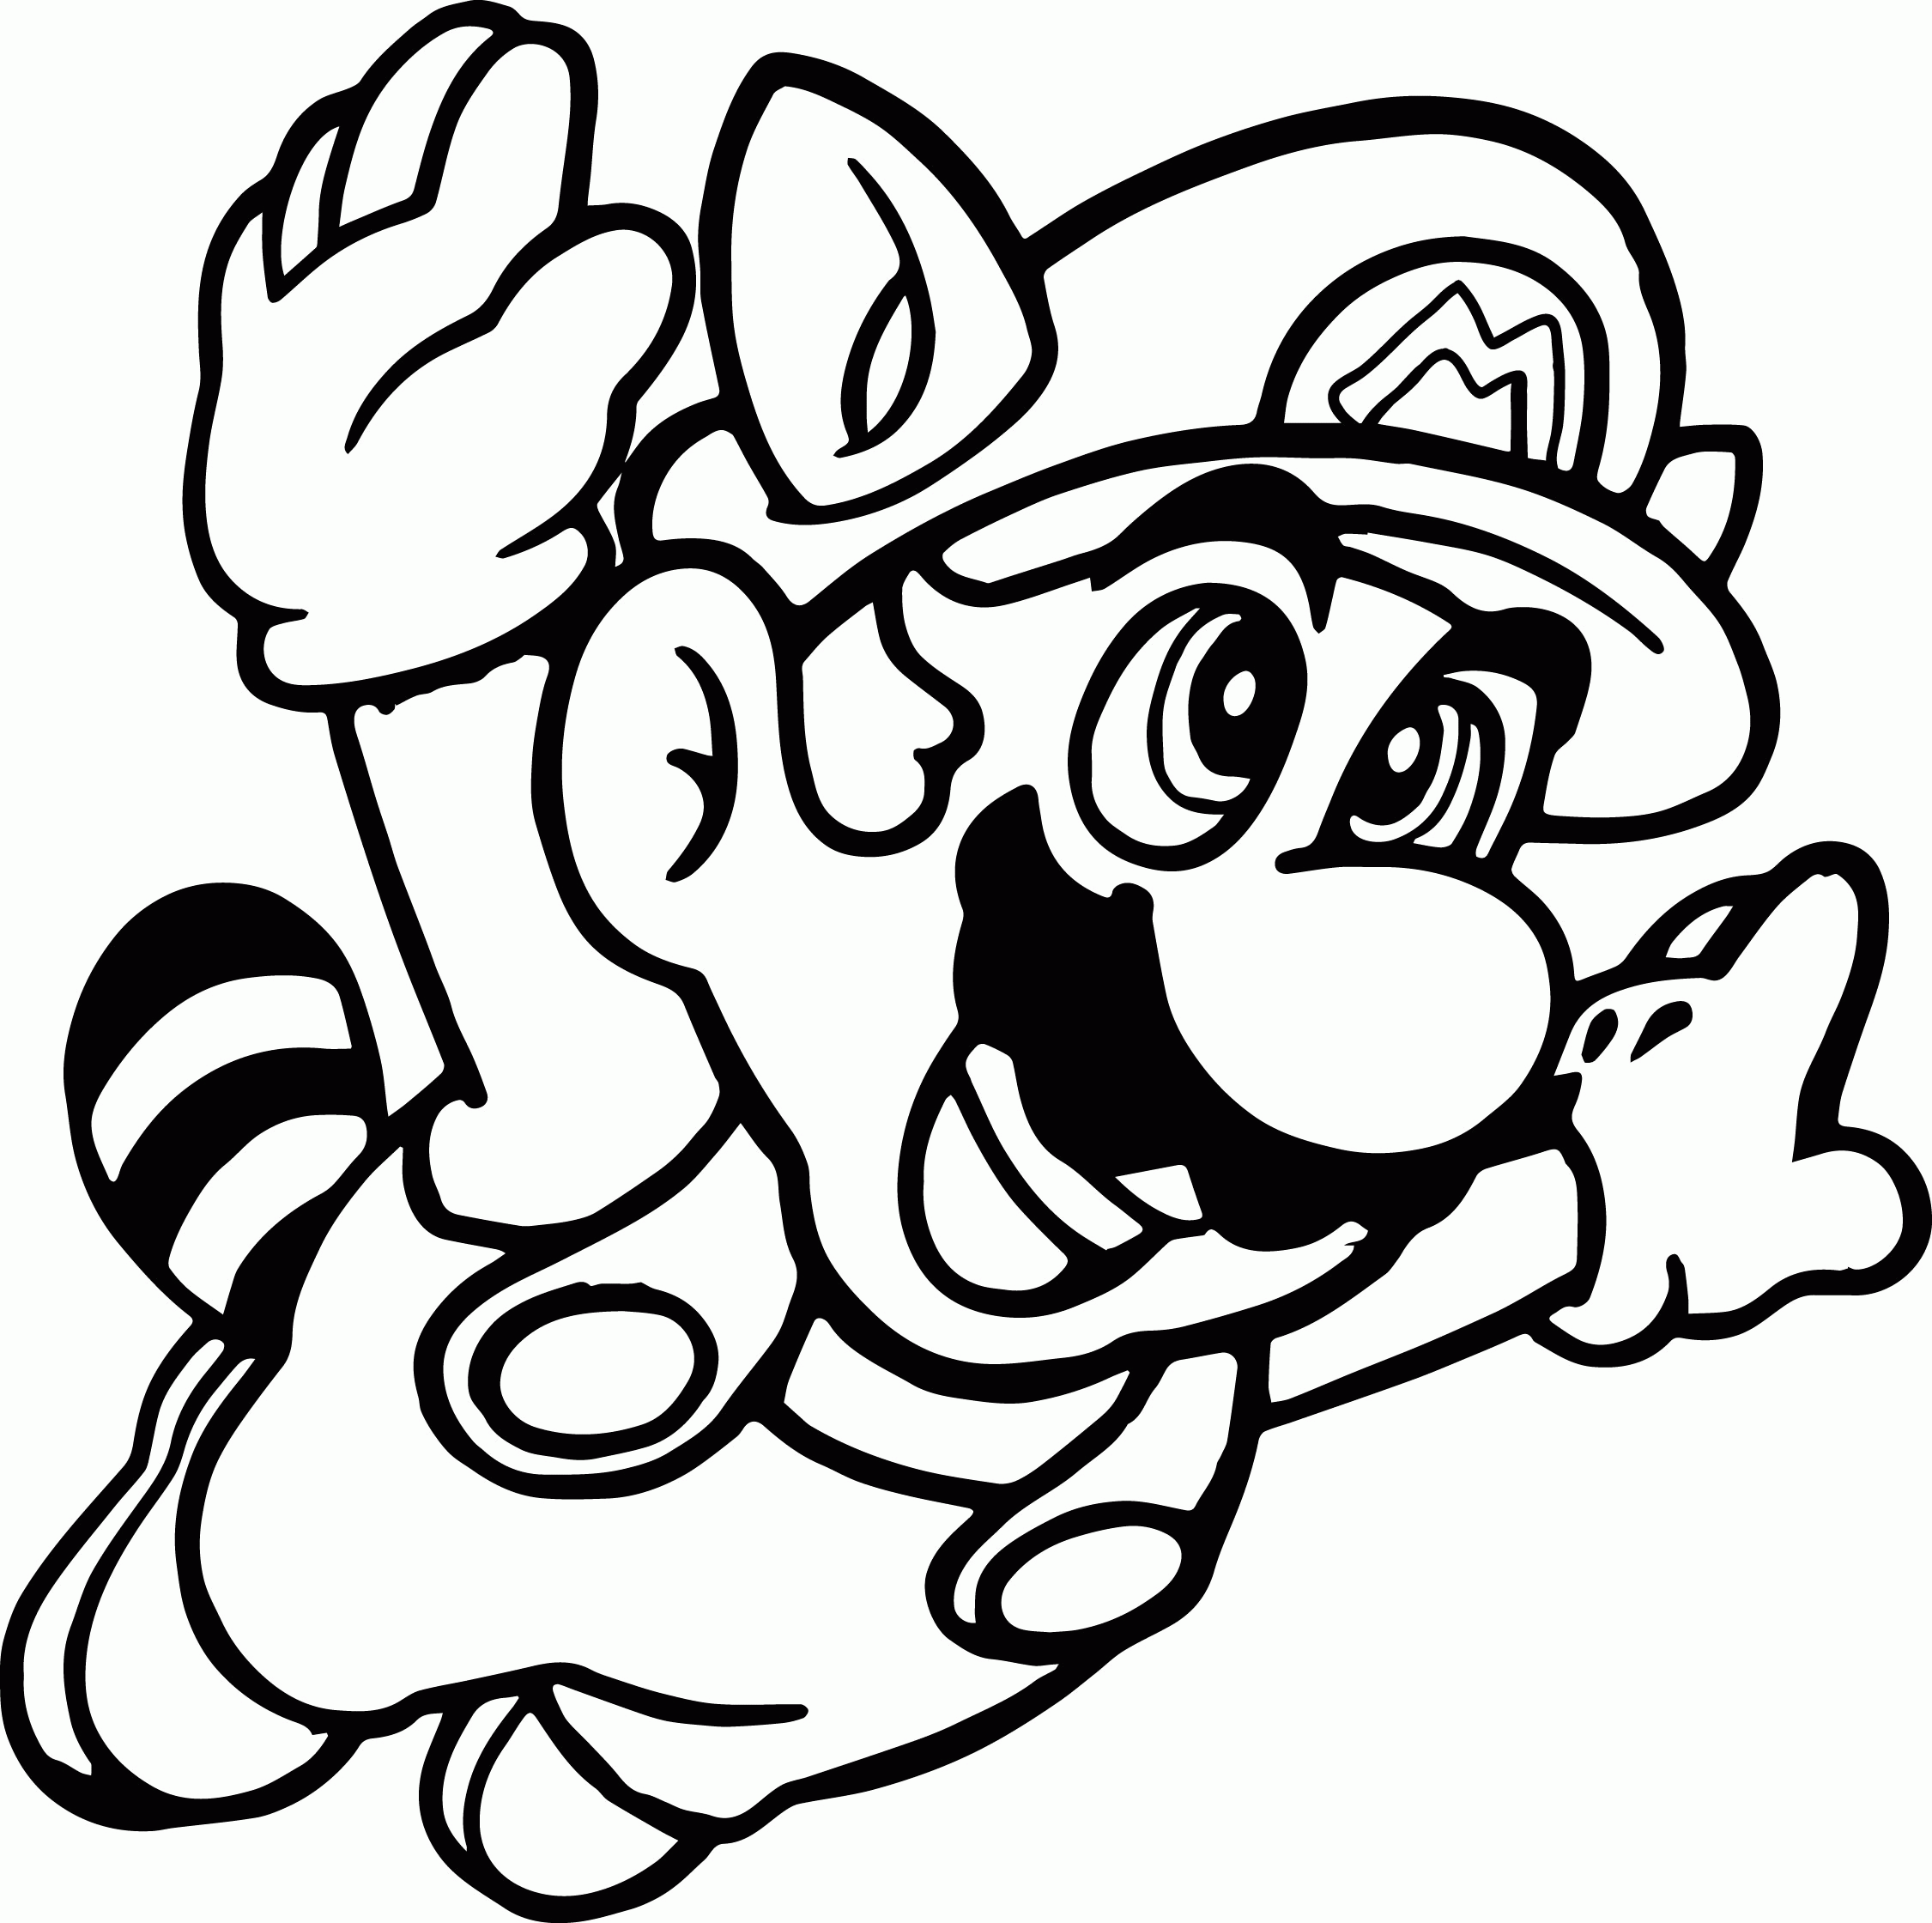 free-toad-coloring-pages-from-super-mario-download-free-toad-coloring-pages-from-super-mario